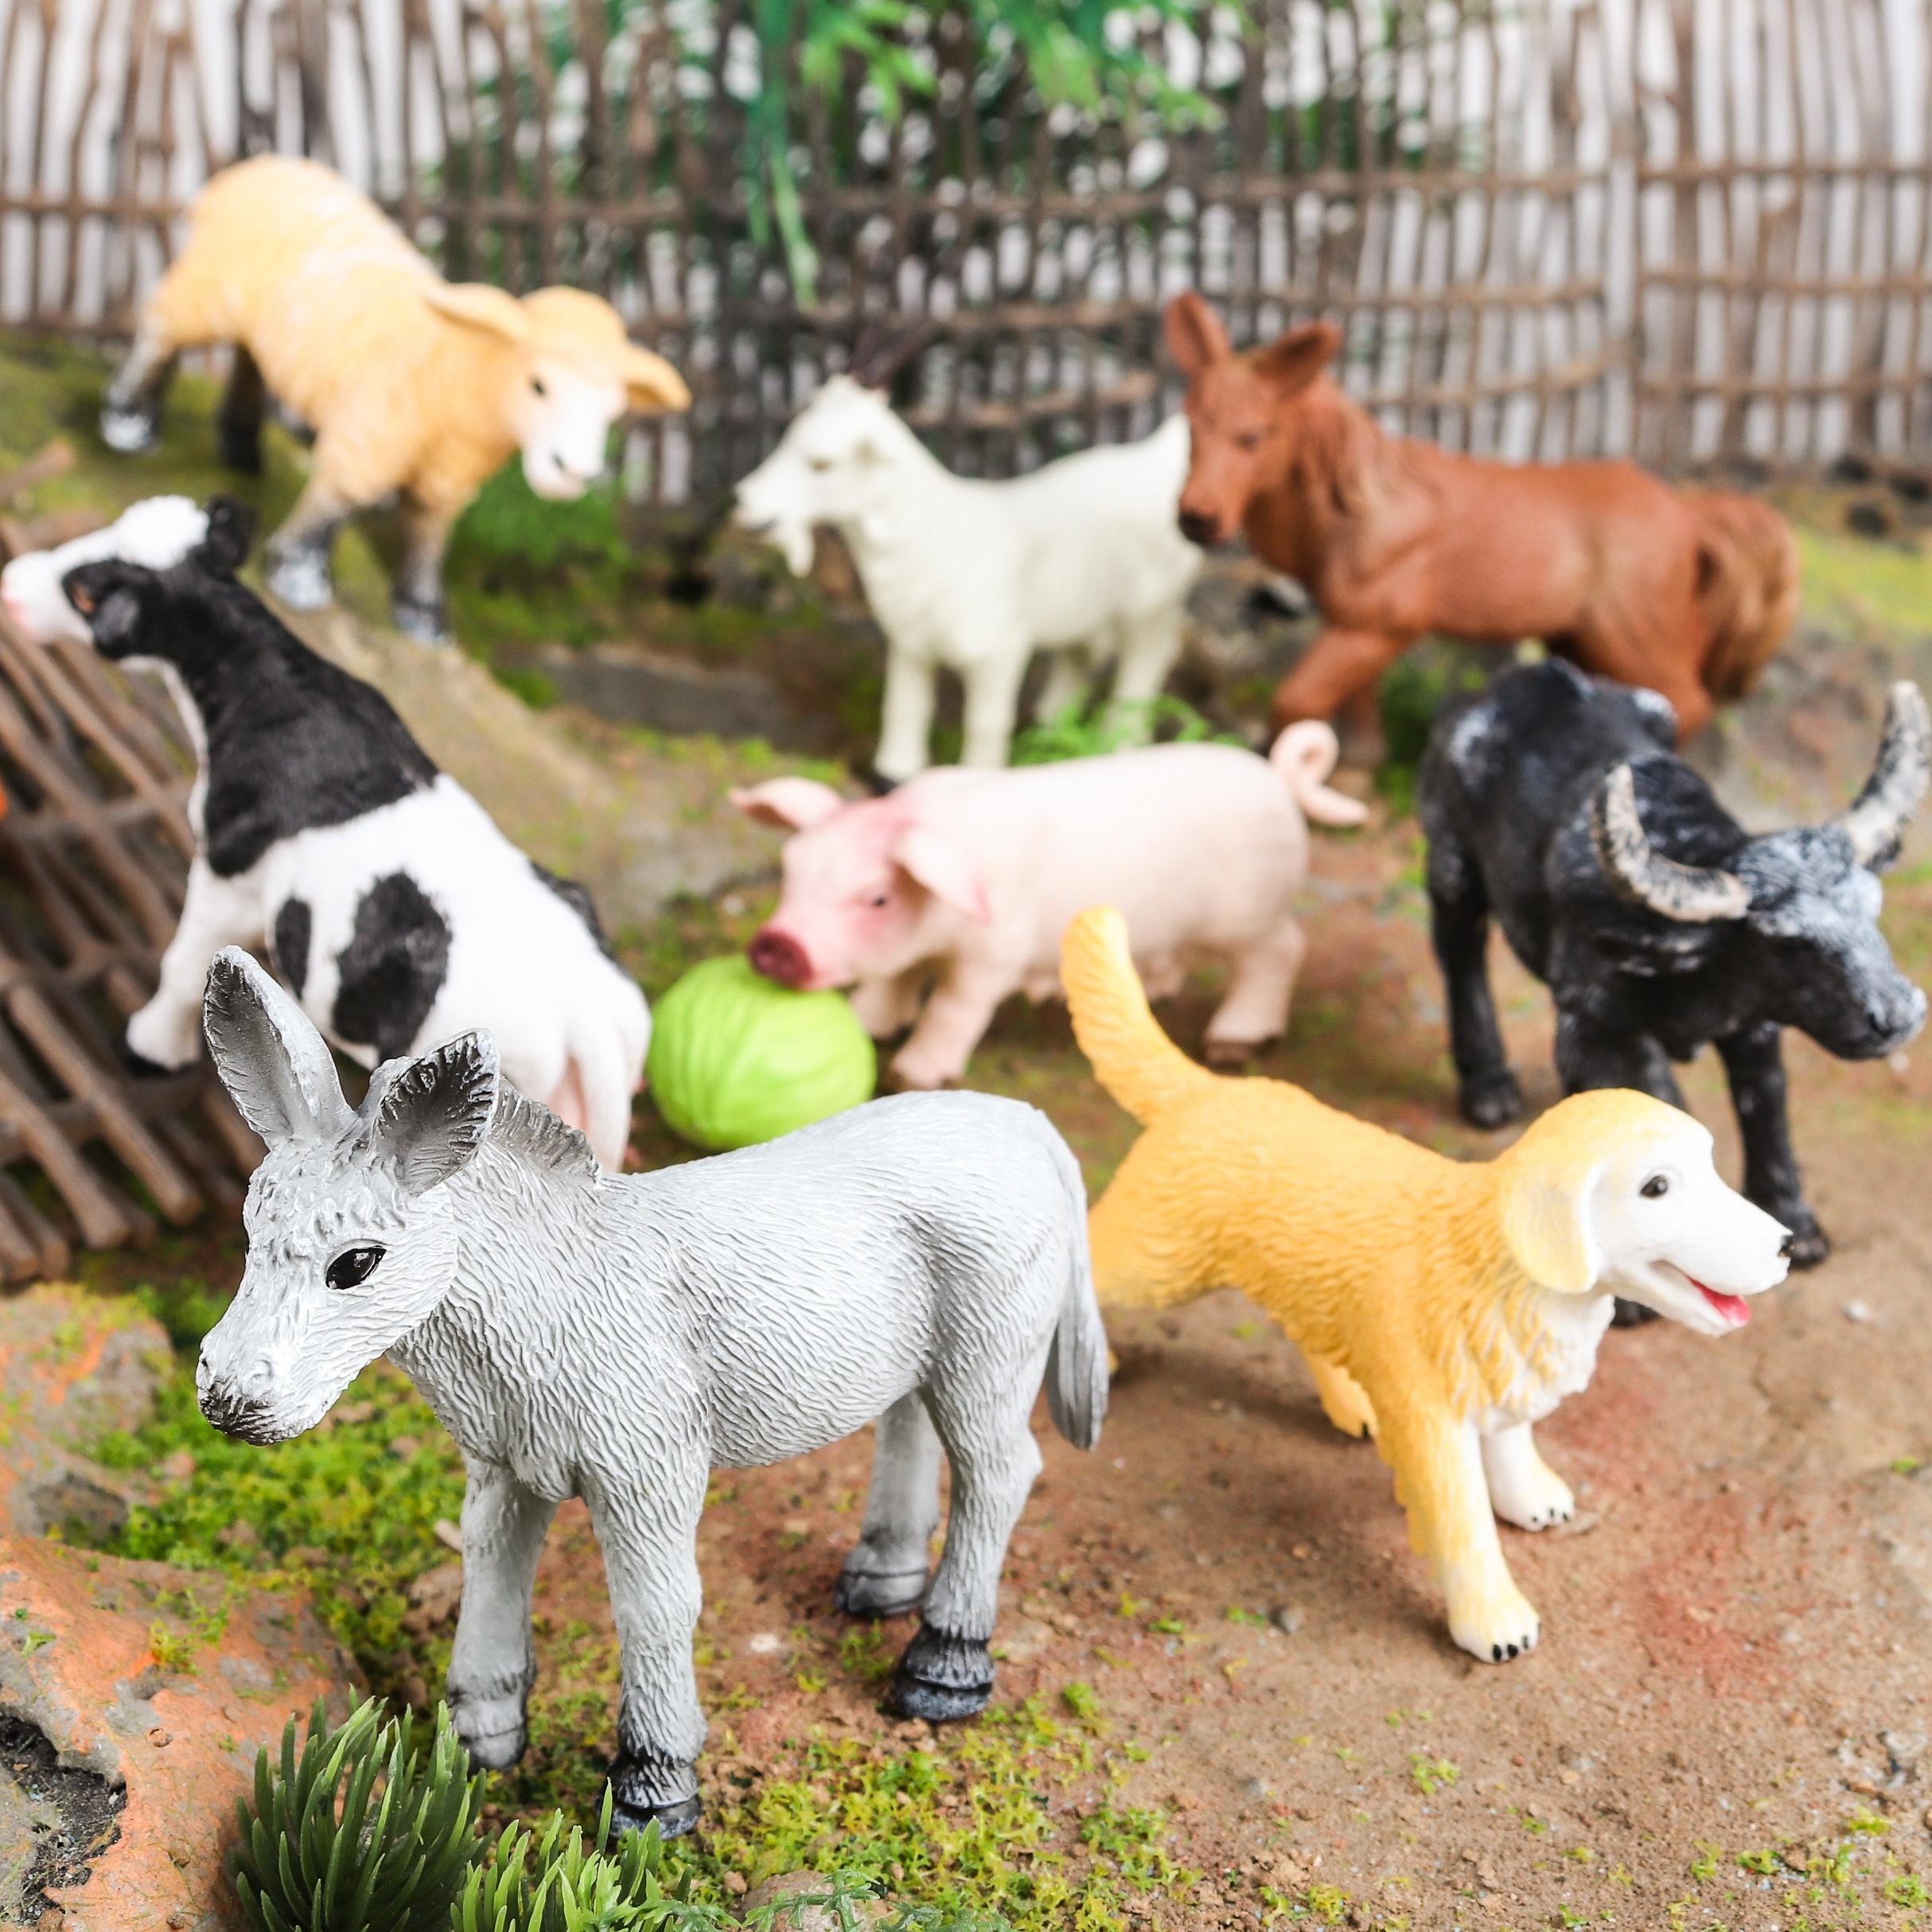 Set of 10 Farm Animal Figurines - Cute Little Animal Figures for Decoration / Gifts or Party Favors